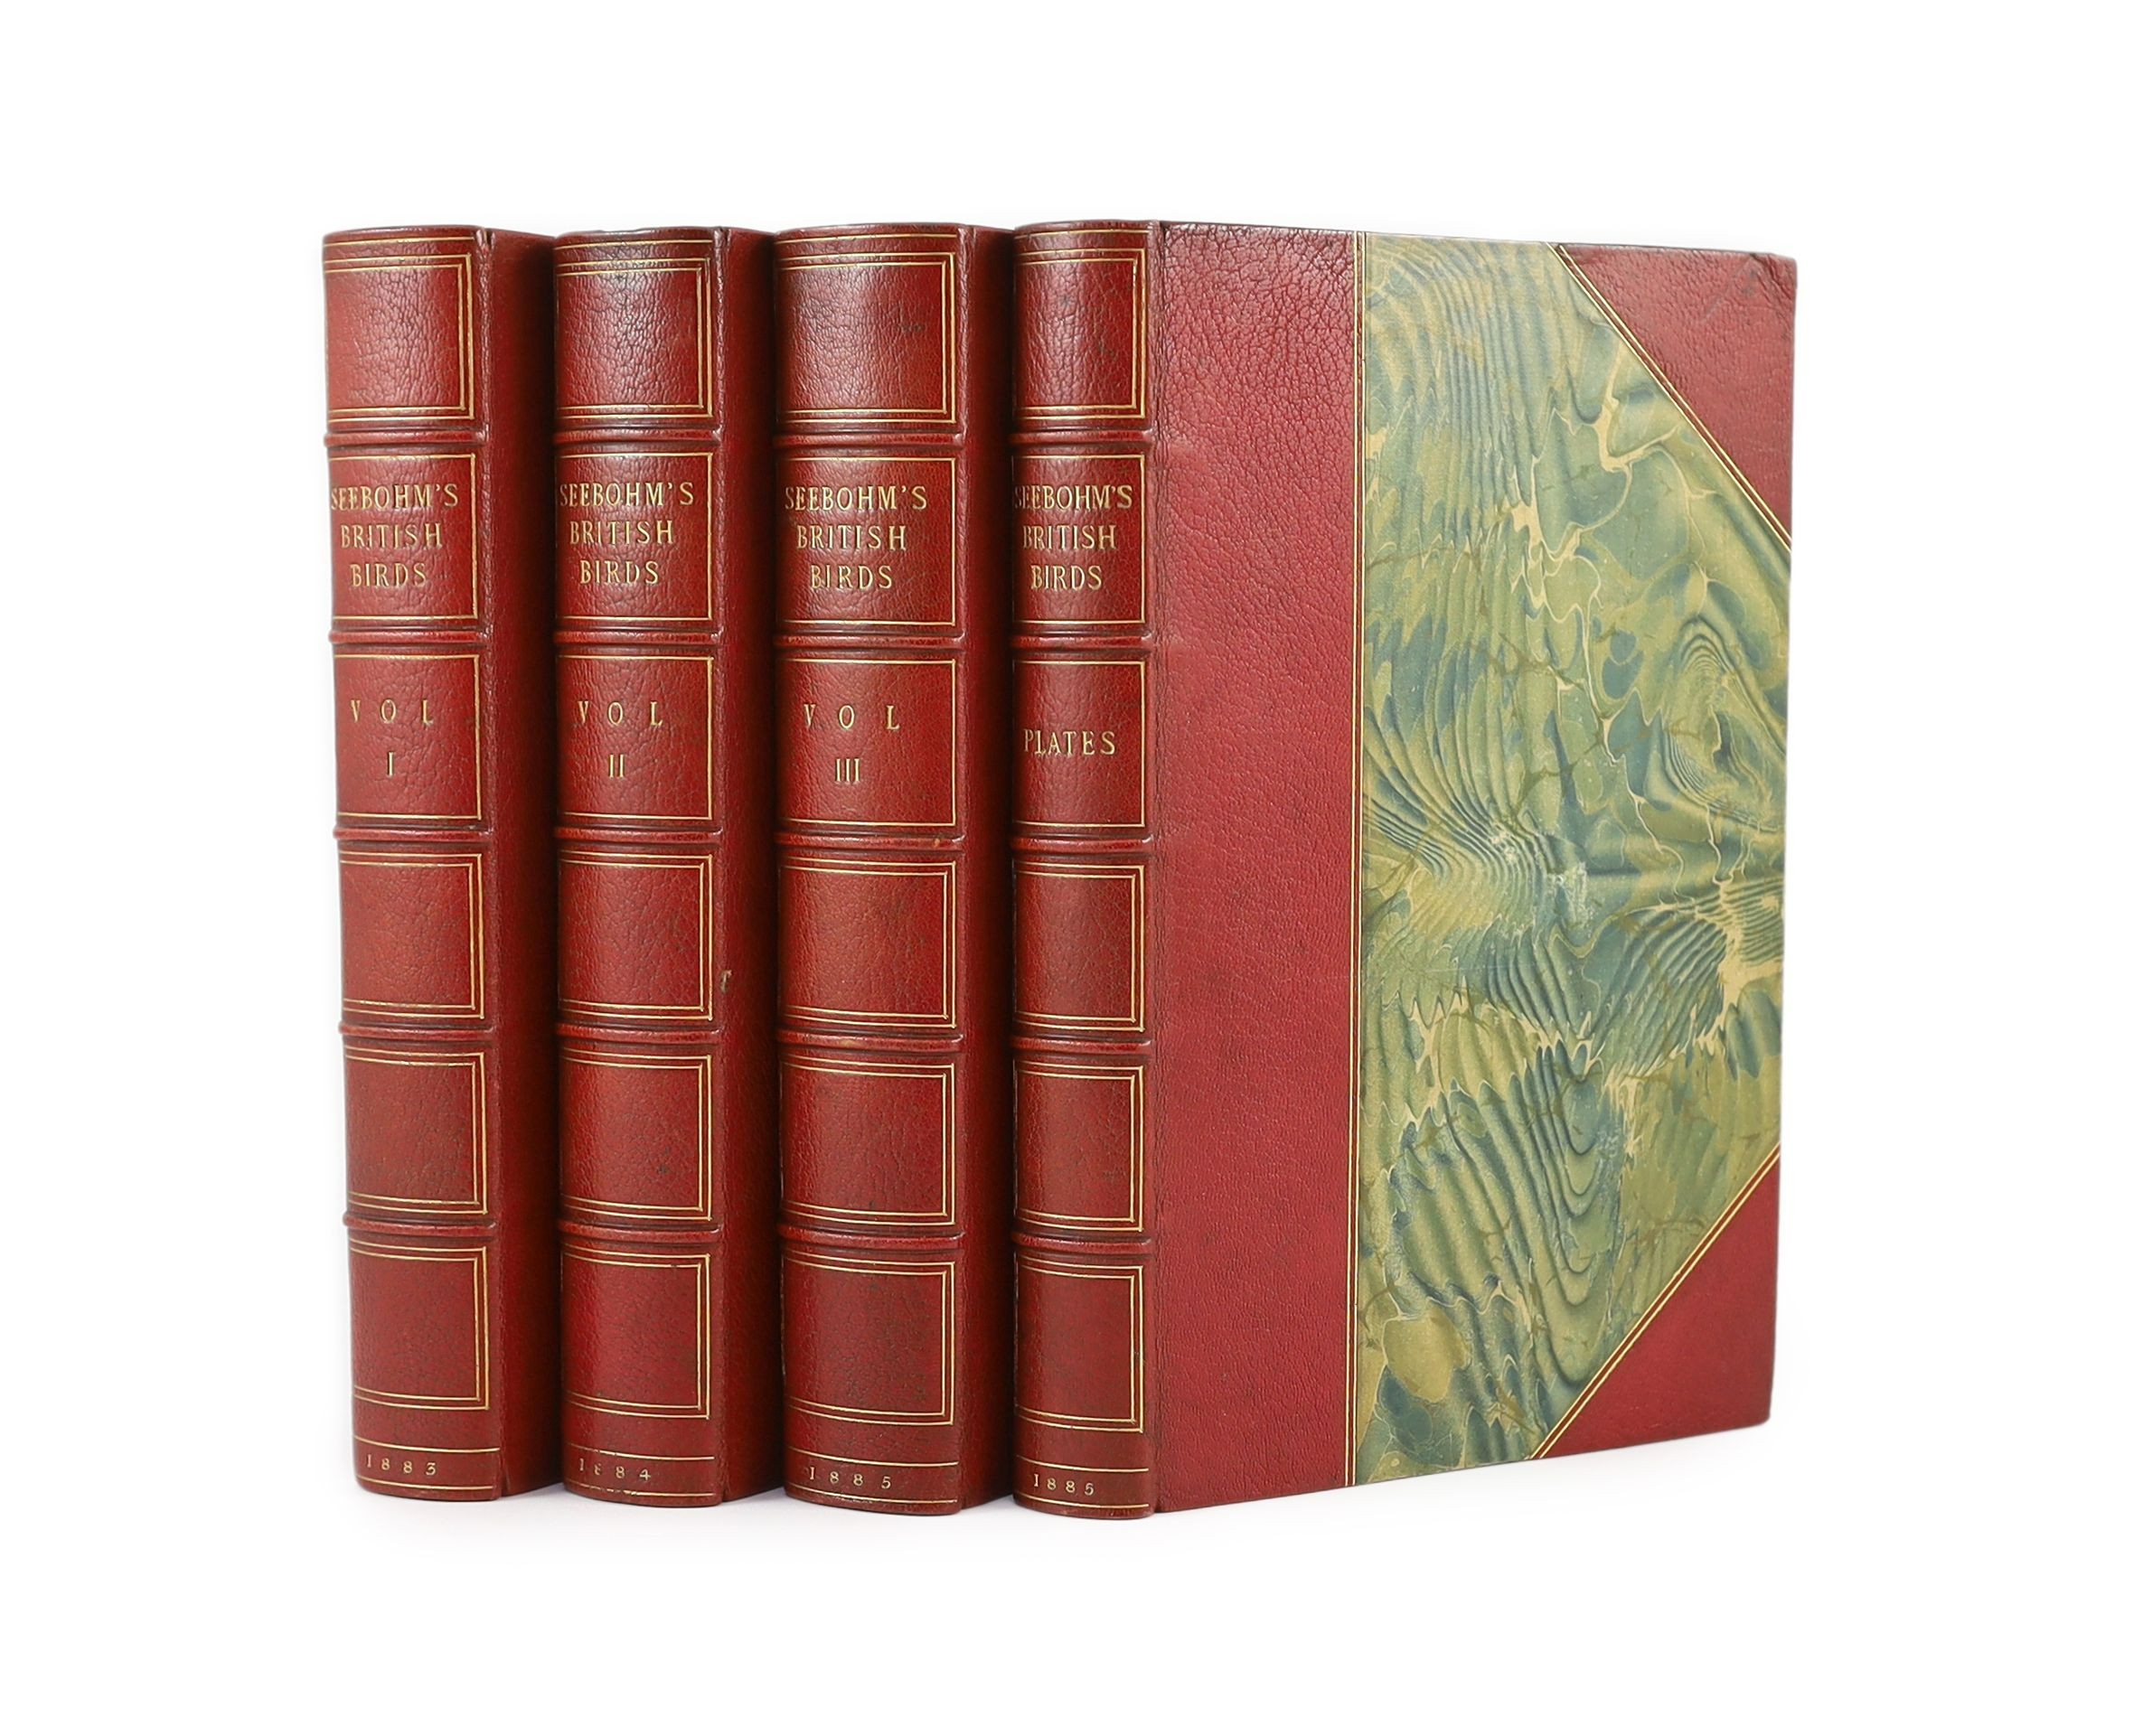 Seebohm, Henry - A History of British Birds, 1st edition, 4 vols, half red morocco gilt, with 68 coloured plates, some foxing and a few pencil annotations, bookplate of Mr. Justice Ridley, London, 1883-85